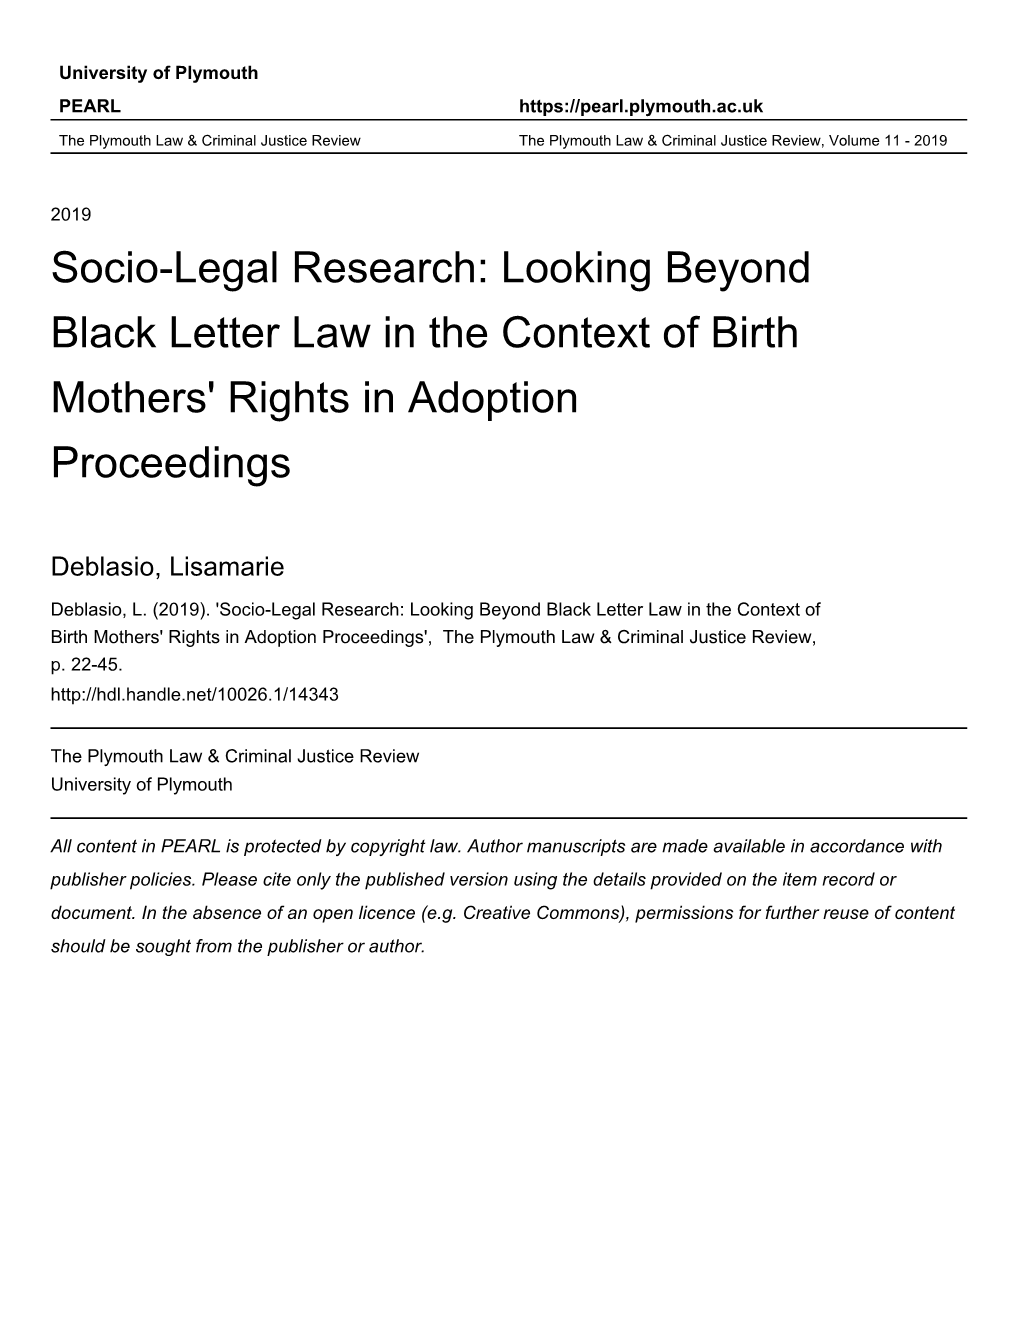 Socio-Legal Research: Looking Beyond Black Letter Law in the Context of Birth Mothers' Rights in Adoption Proceedings